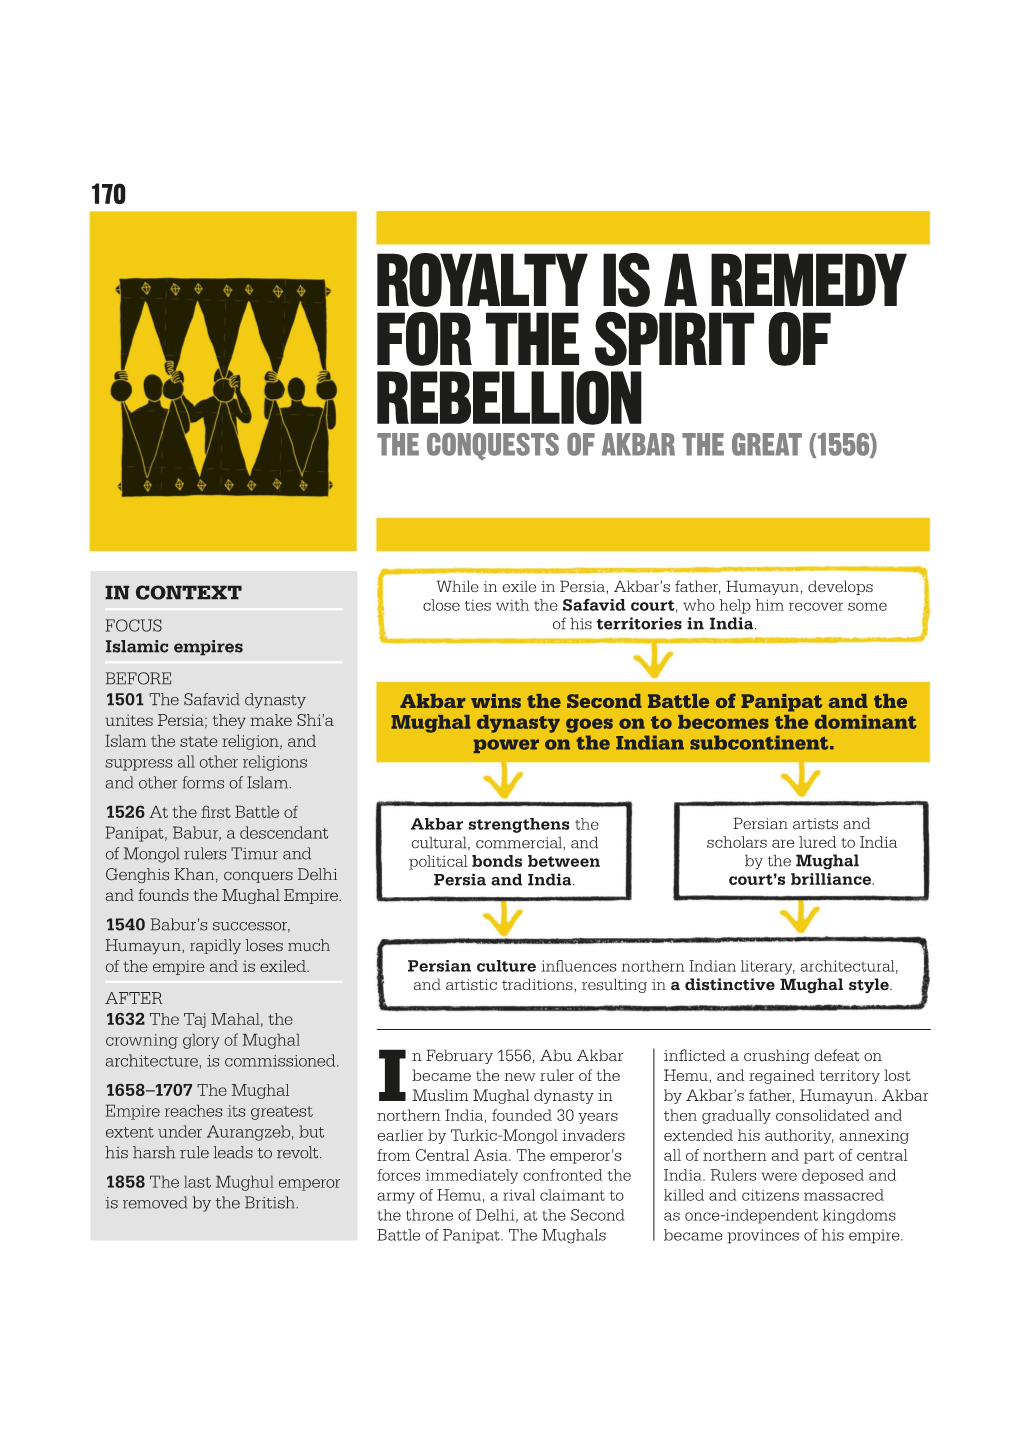 Royalty Is a Remedy for the Spirit of Rebellion